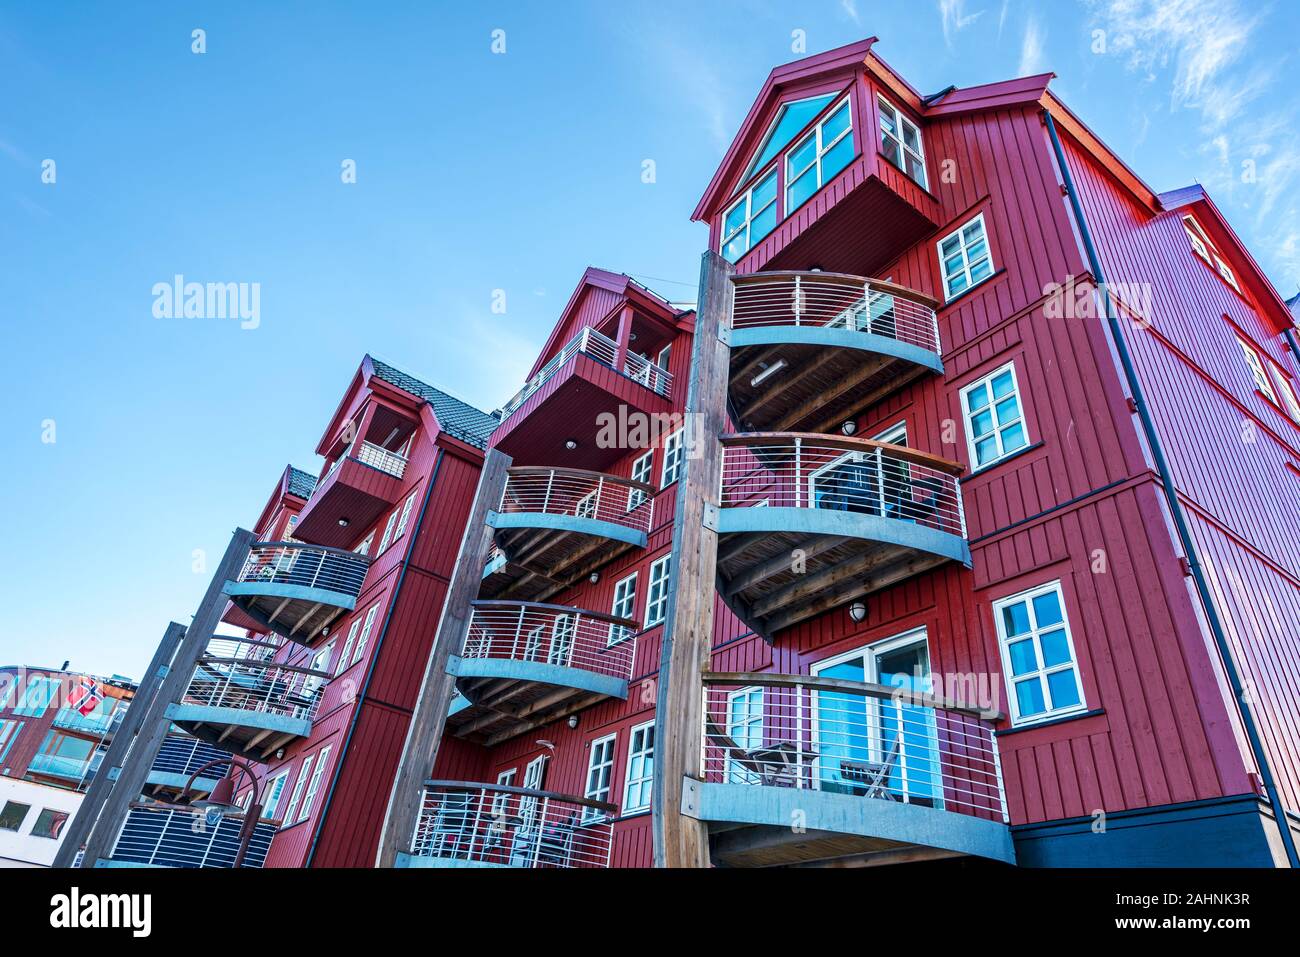 The Residential building, as an example of the Modern Nordic architecture in the center of Svolvaer Town, the capital of Lofoten archipelago. Nordland Stock Photo